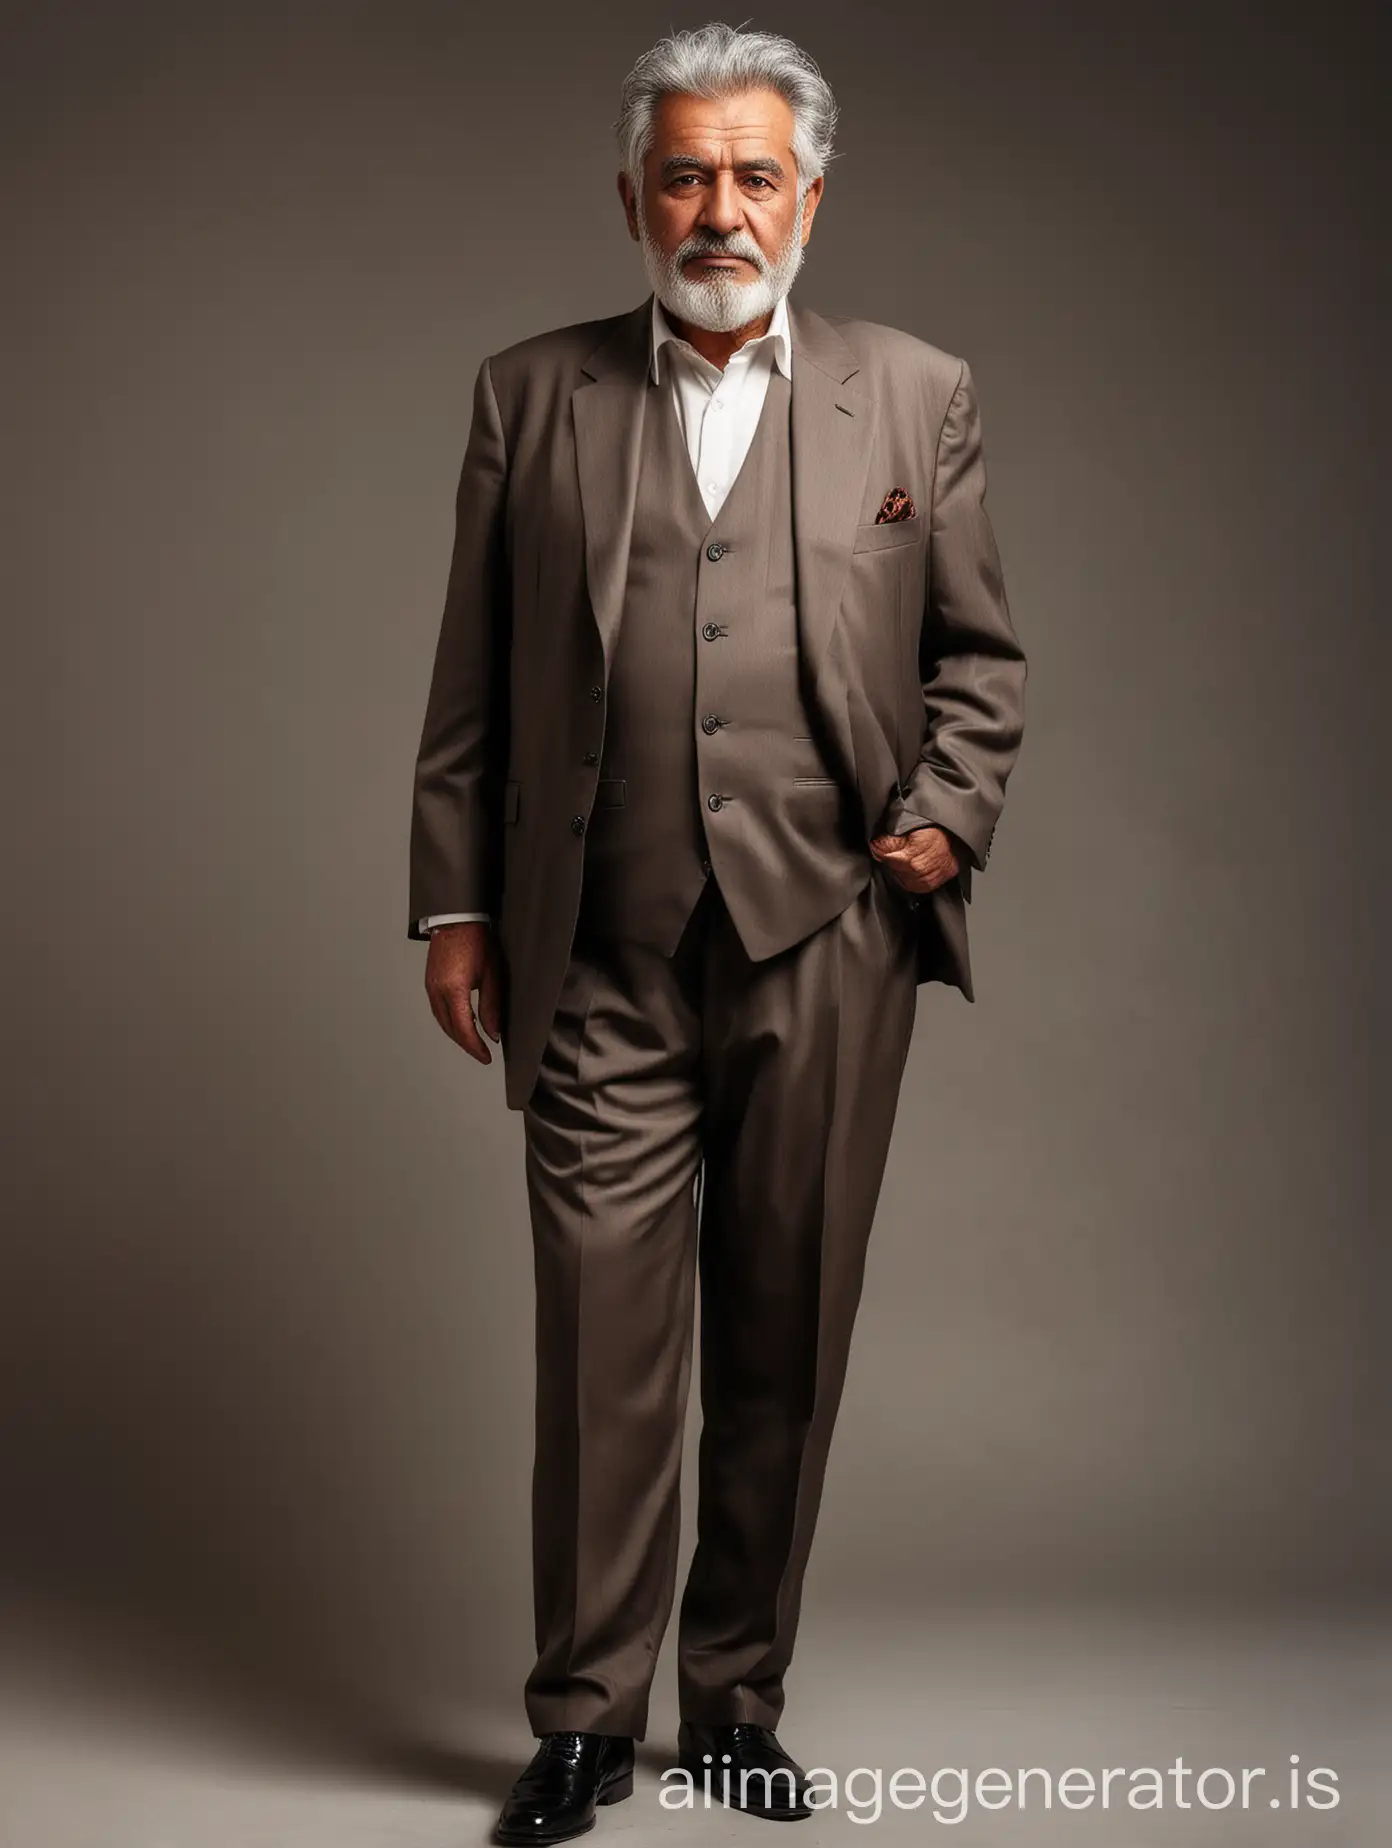 iranian lux fat old man 70 years old, shot height, wearing dark brown suits, white shirt, black shoes, grey hair, full body shot, full body shot, fantasy light cream solid background, dramatic lighting